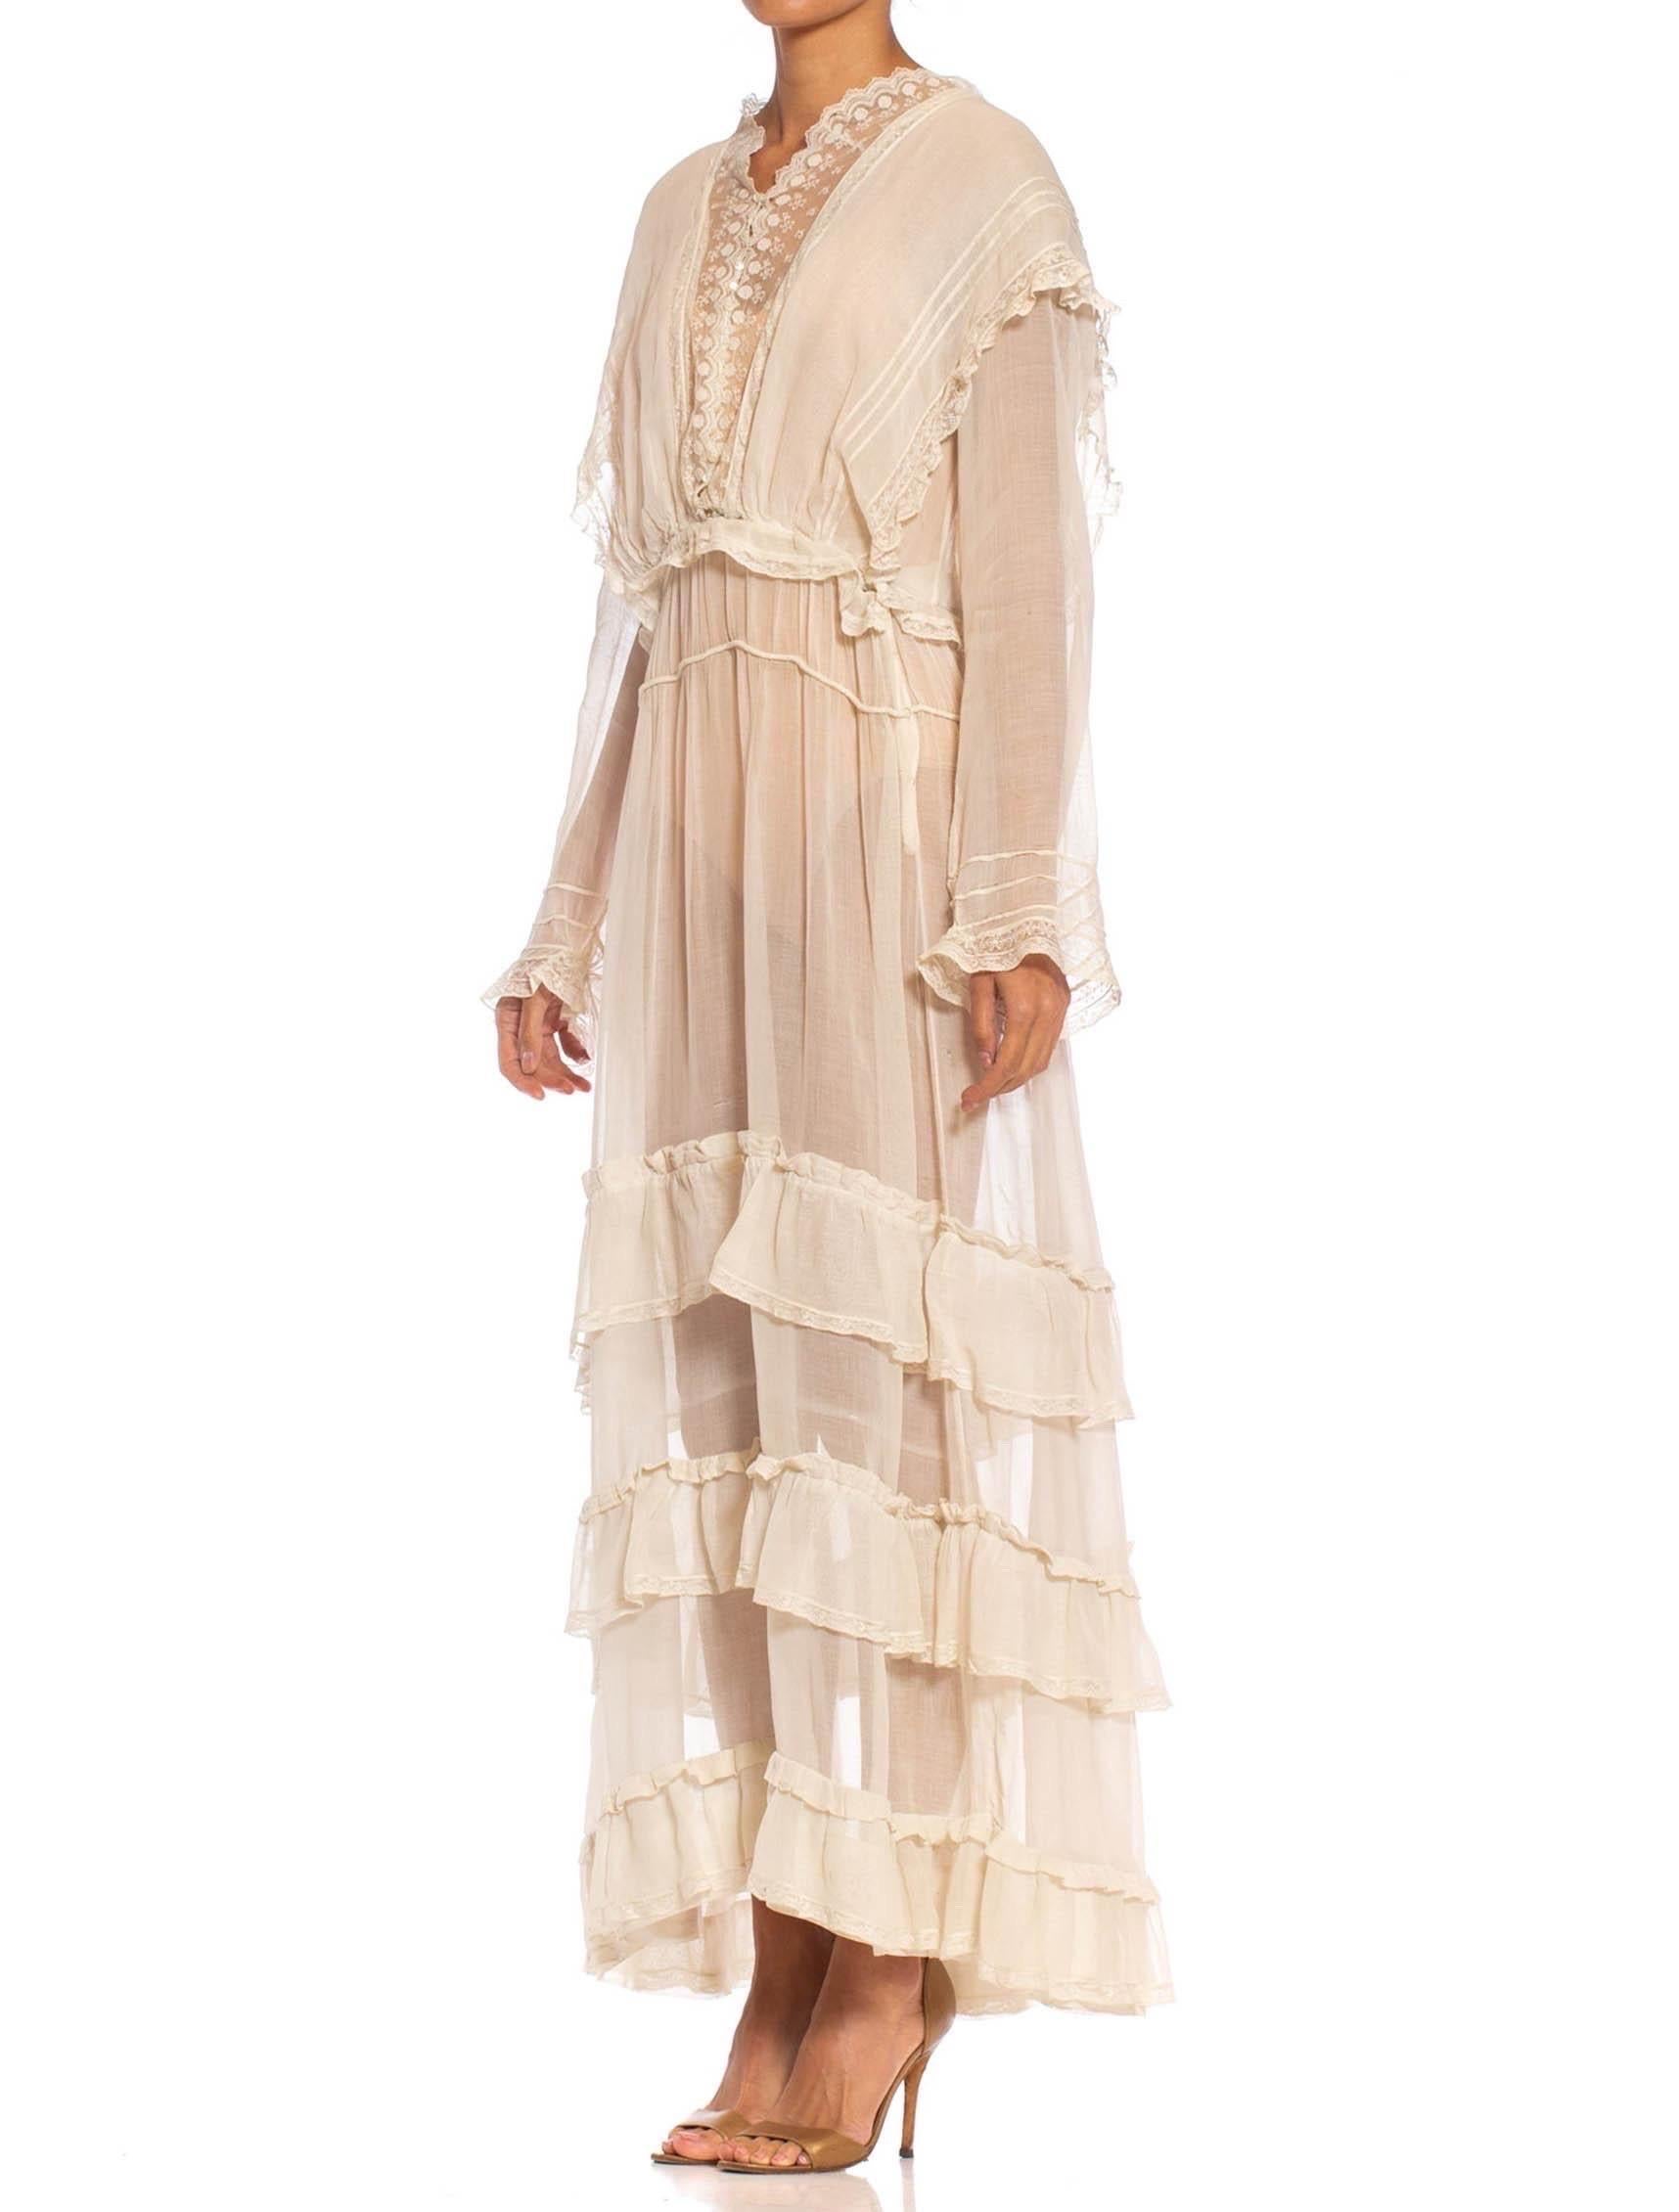 Edwardian Off White Organic Cotton Voile & Lace Long Sleeved Ruffled Tea Dress For Sale 3